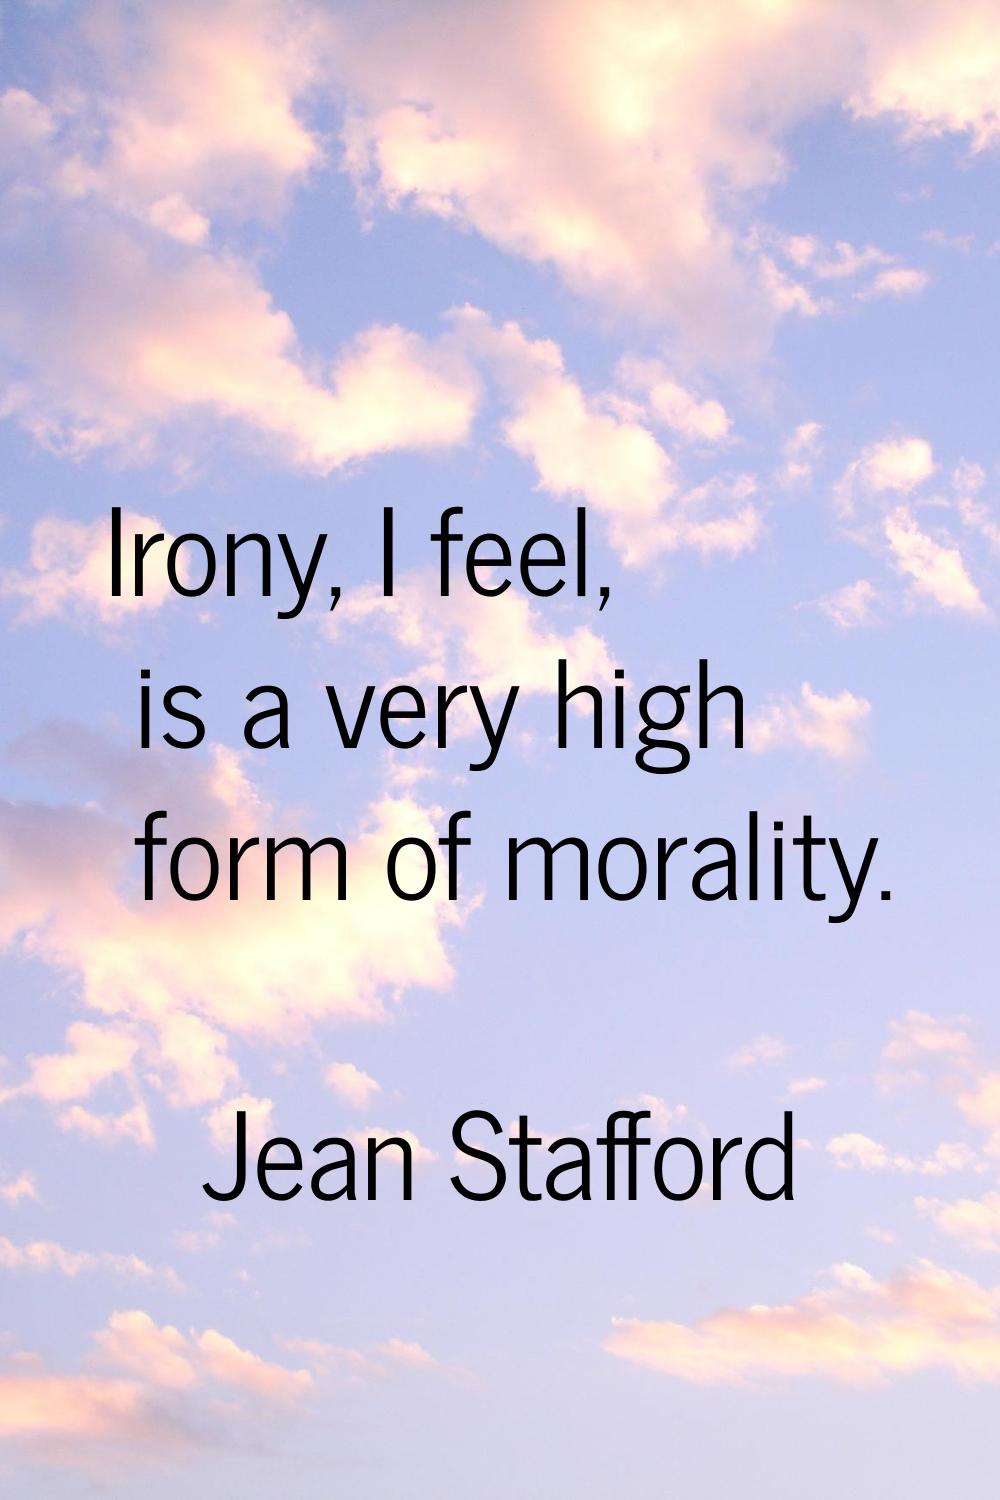 Irony, I feel, is a very high form of morality.